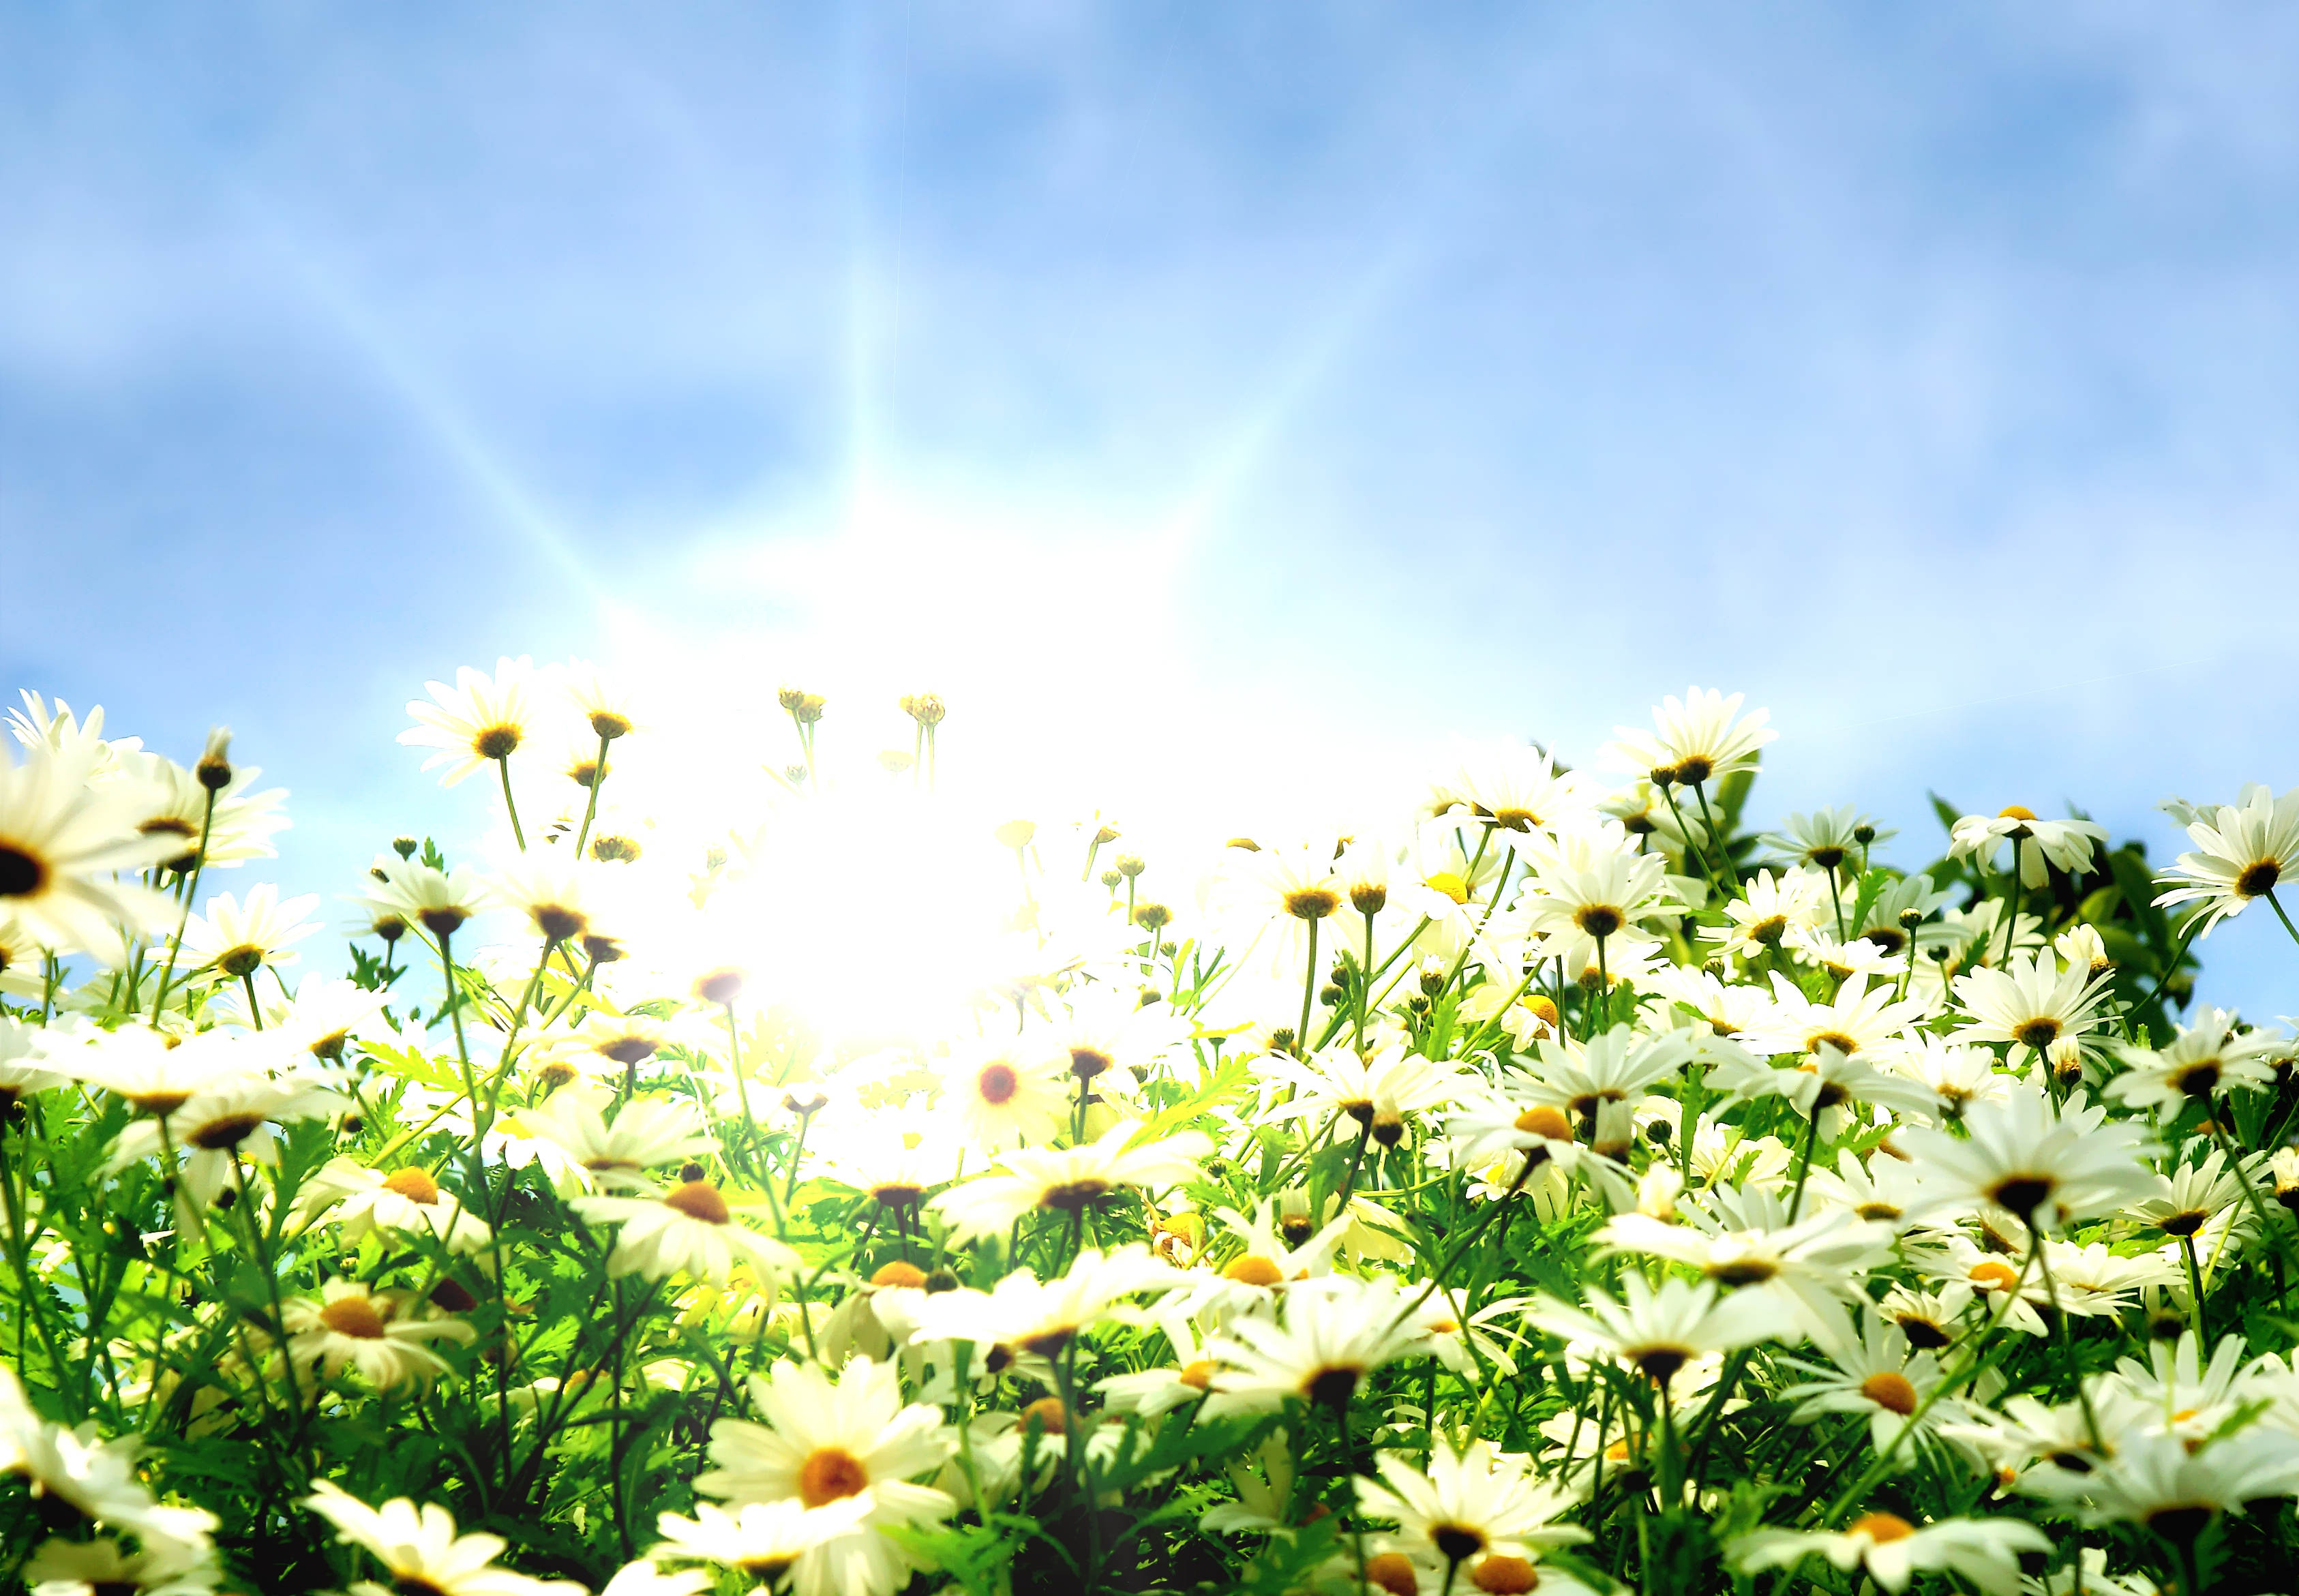 Earth Daisy HD Wallpaper | Background Image